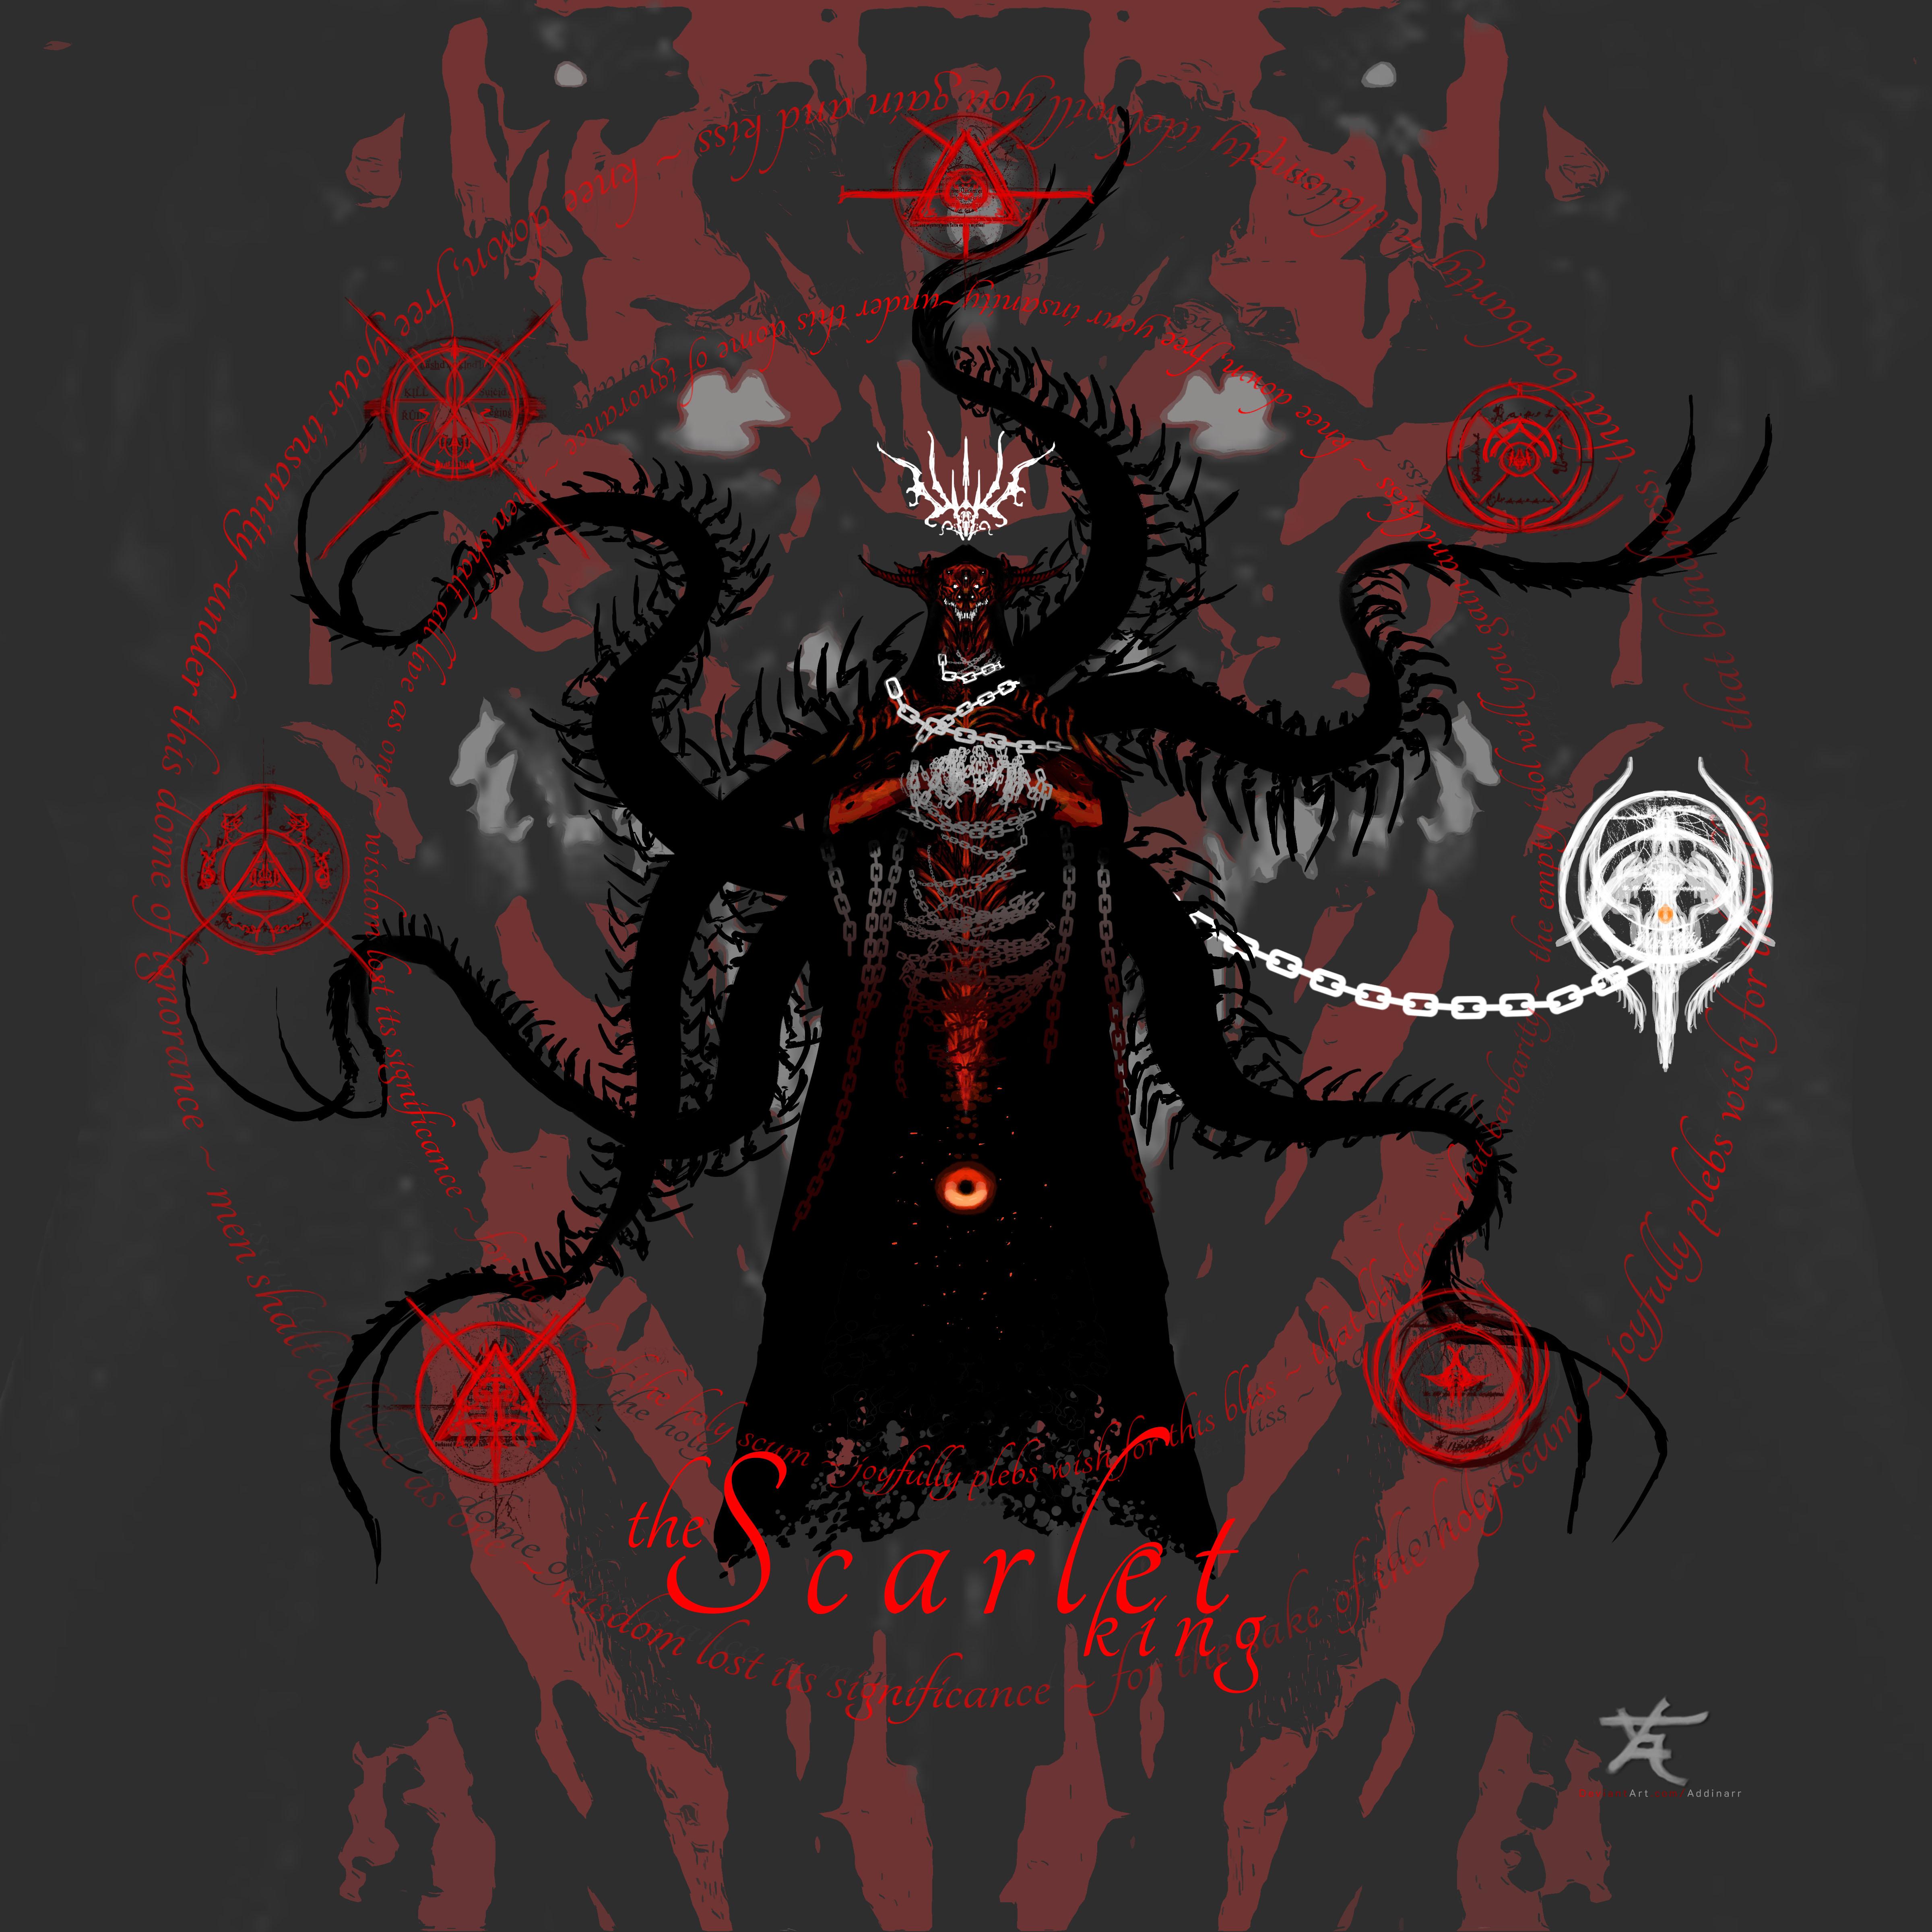 The Scarlet King Addinarr Art The Scarlet King Scp 794548980?ga_submit_new=10%3A1555815712